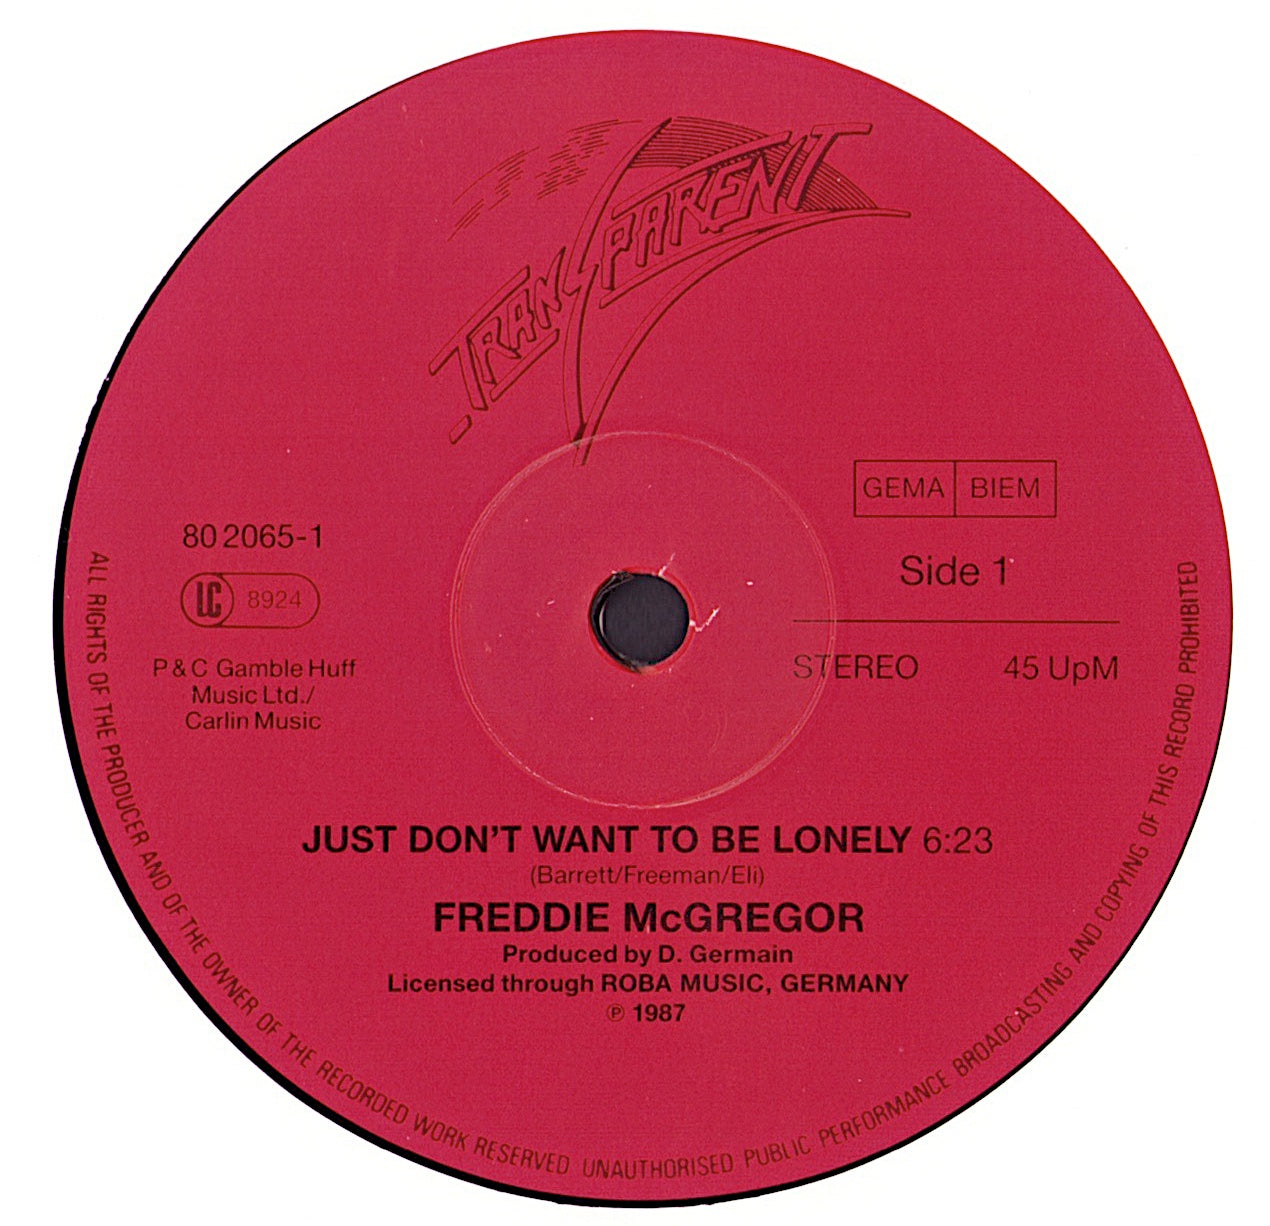 Freddie McGregor - Just Don't Want To Be Lonely Vinyl 12" Maxi-Single